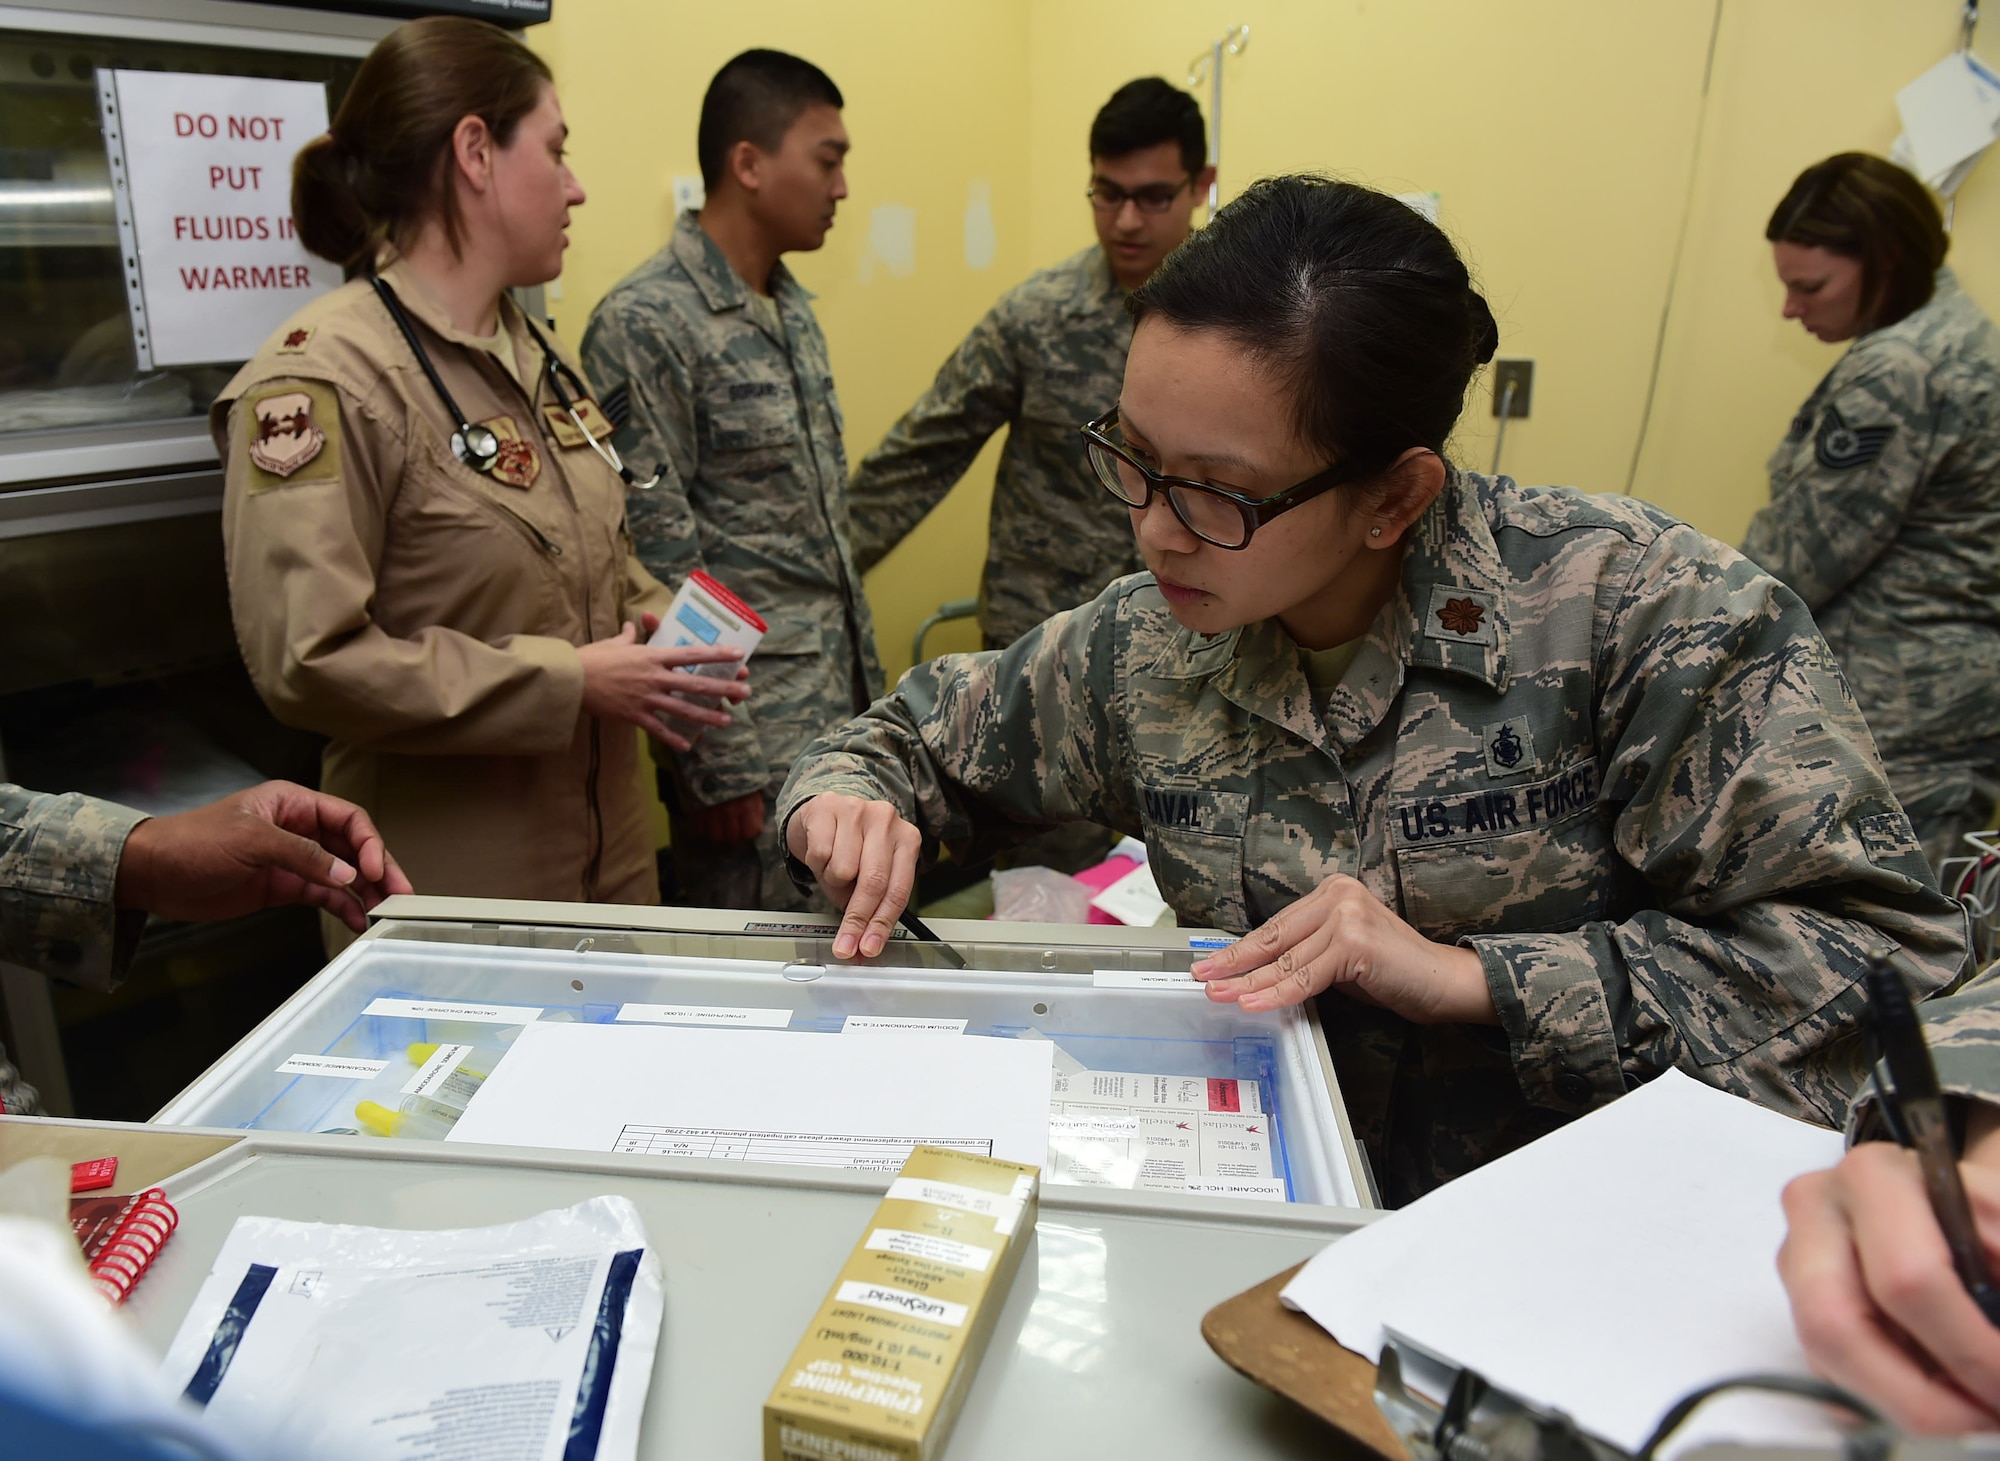 Maj. Jennie Caval, 386th Expeditionary Medical Group chief nurse, searches for medication to administer to a mock patient during a Code Blue exercise at an undisclosed location in Southwest Asia, Nov. 28, 2015. The 386th EMDG conducts monthly exercises as a way to practice their skills and assess the team’s readiness in the event of a medical emergency. (U.S. Air Force photo by Staff Sgt. Jerilyn Quintanilla)